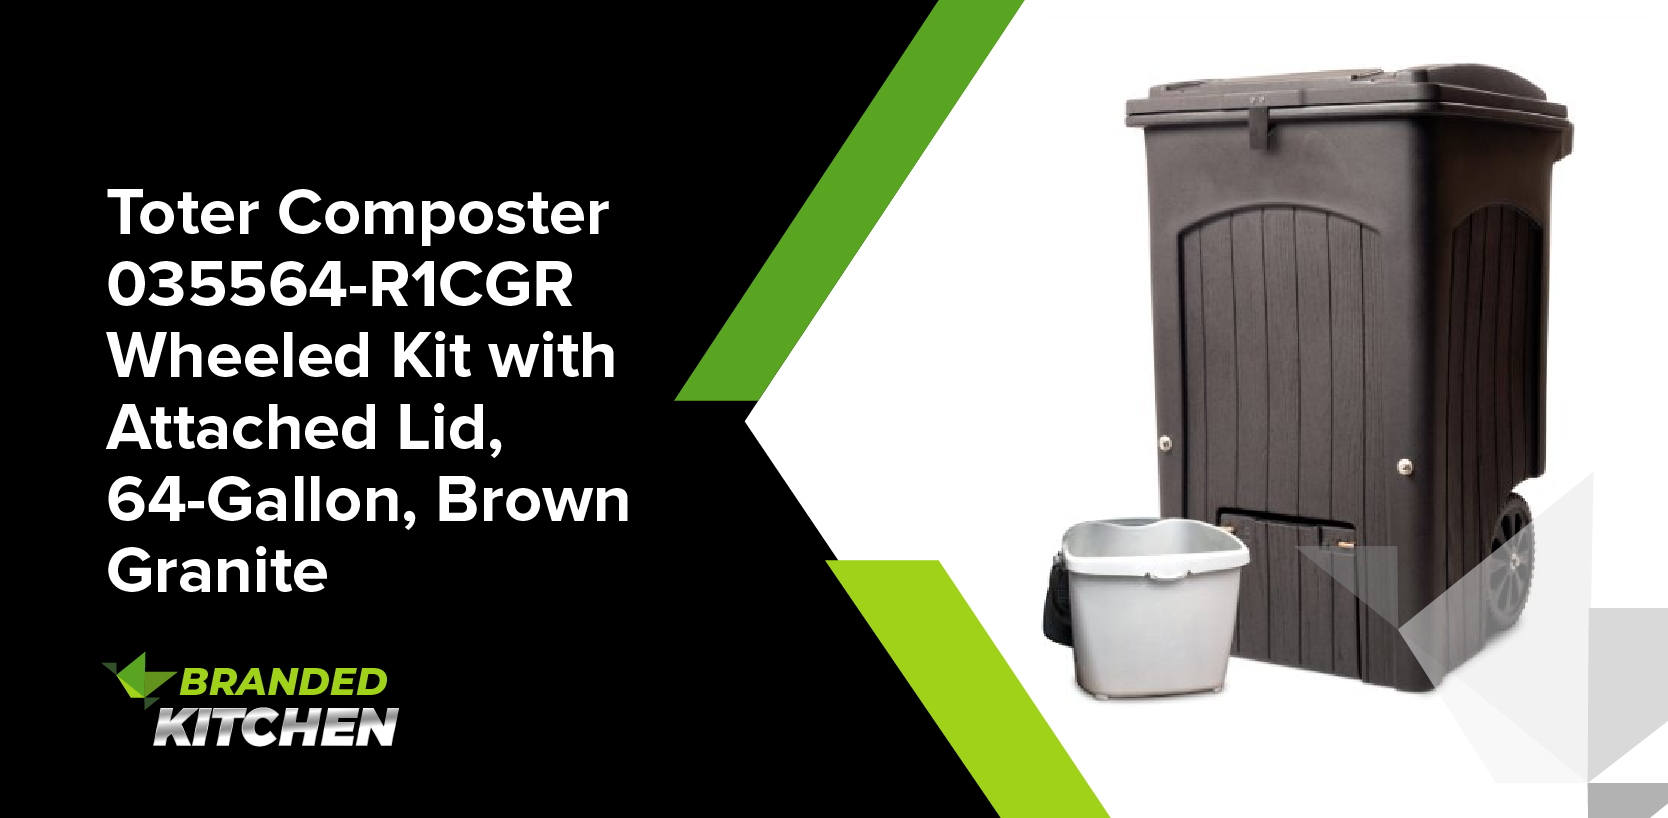 Toter Composter 035564-R1CGR Wheeled Kit with Attached Lid, 64-Gallon, Brown Granite